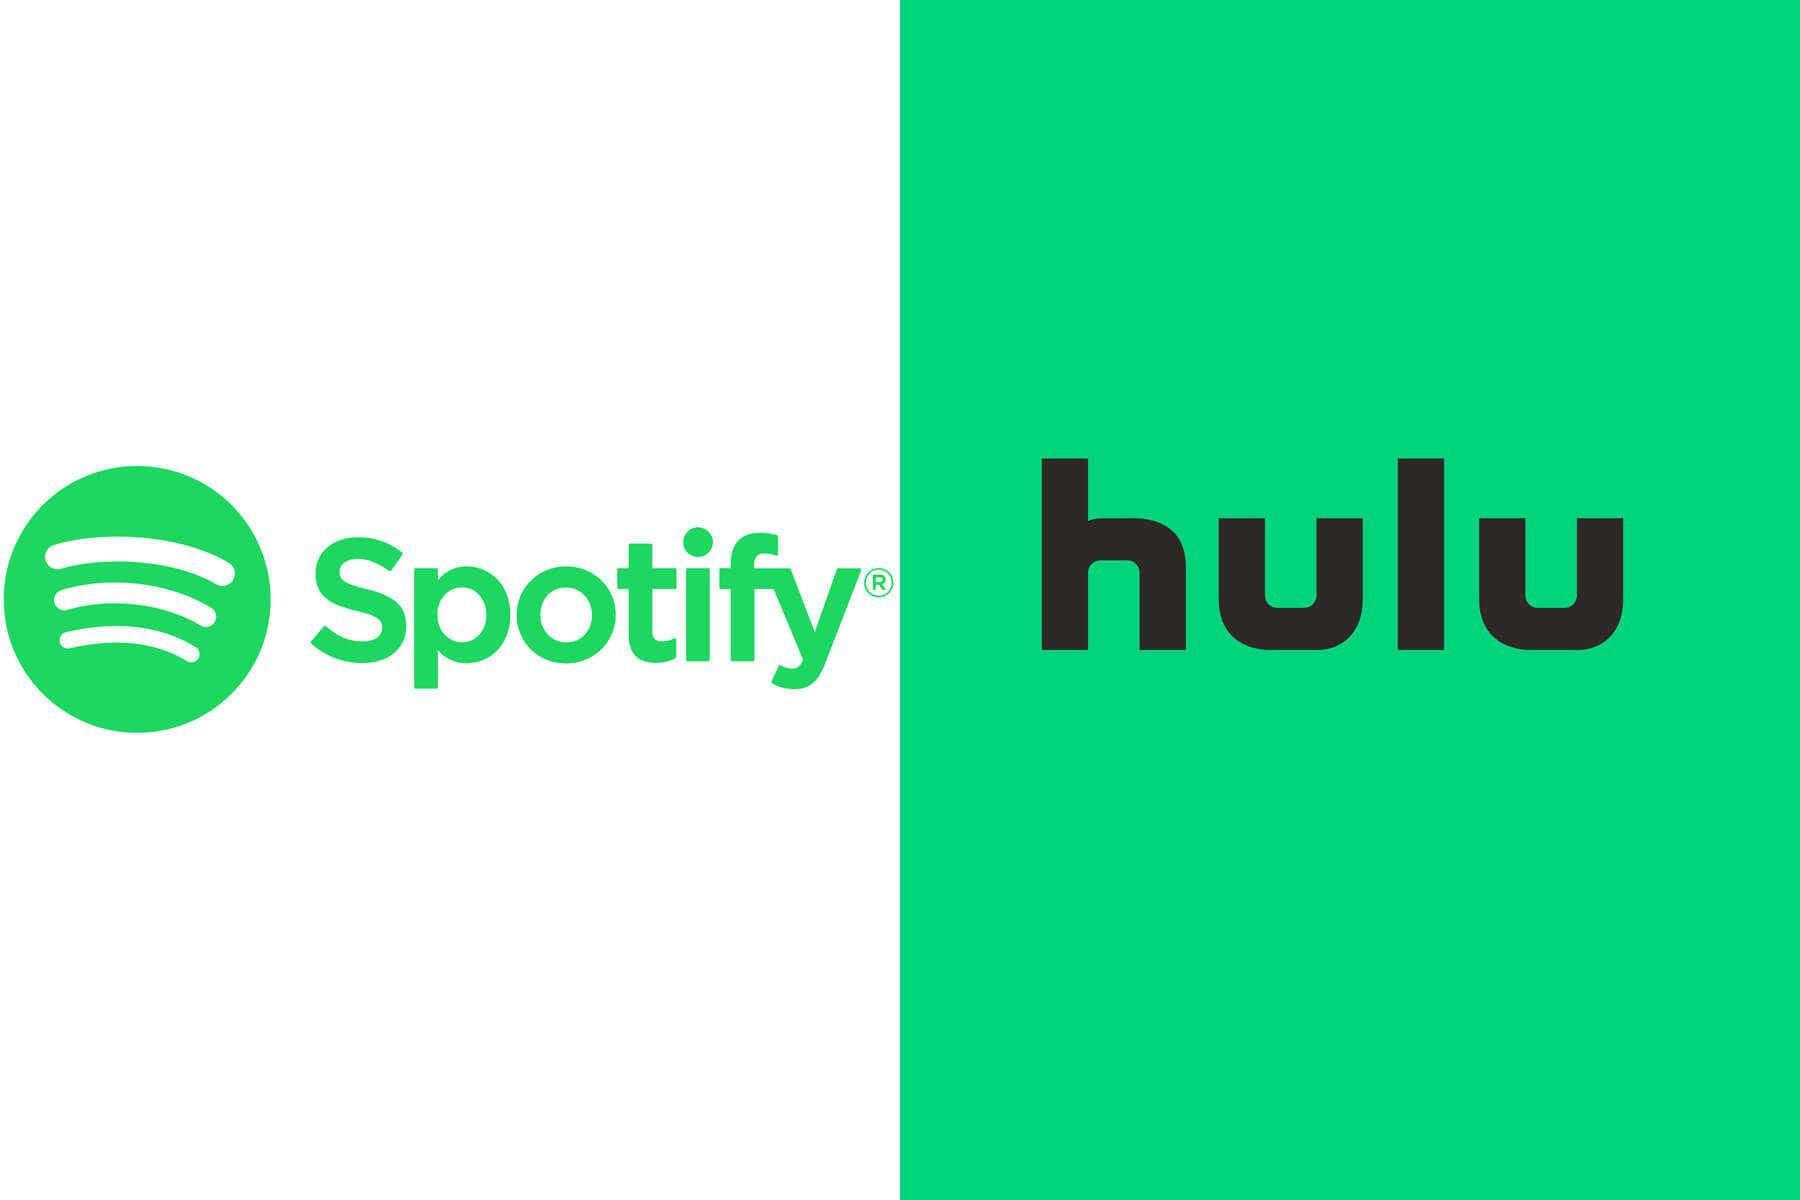 how to log into hulu from spotify